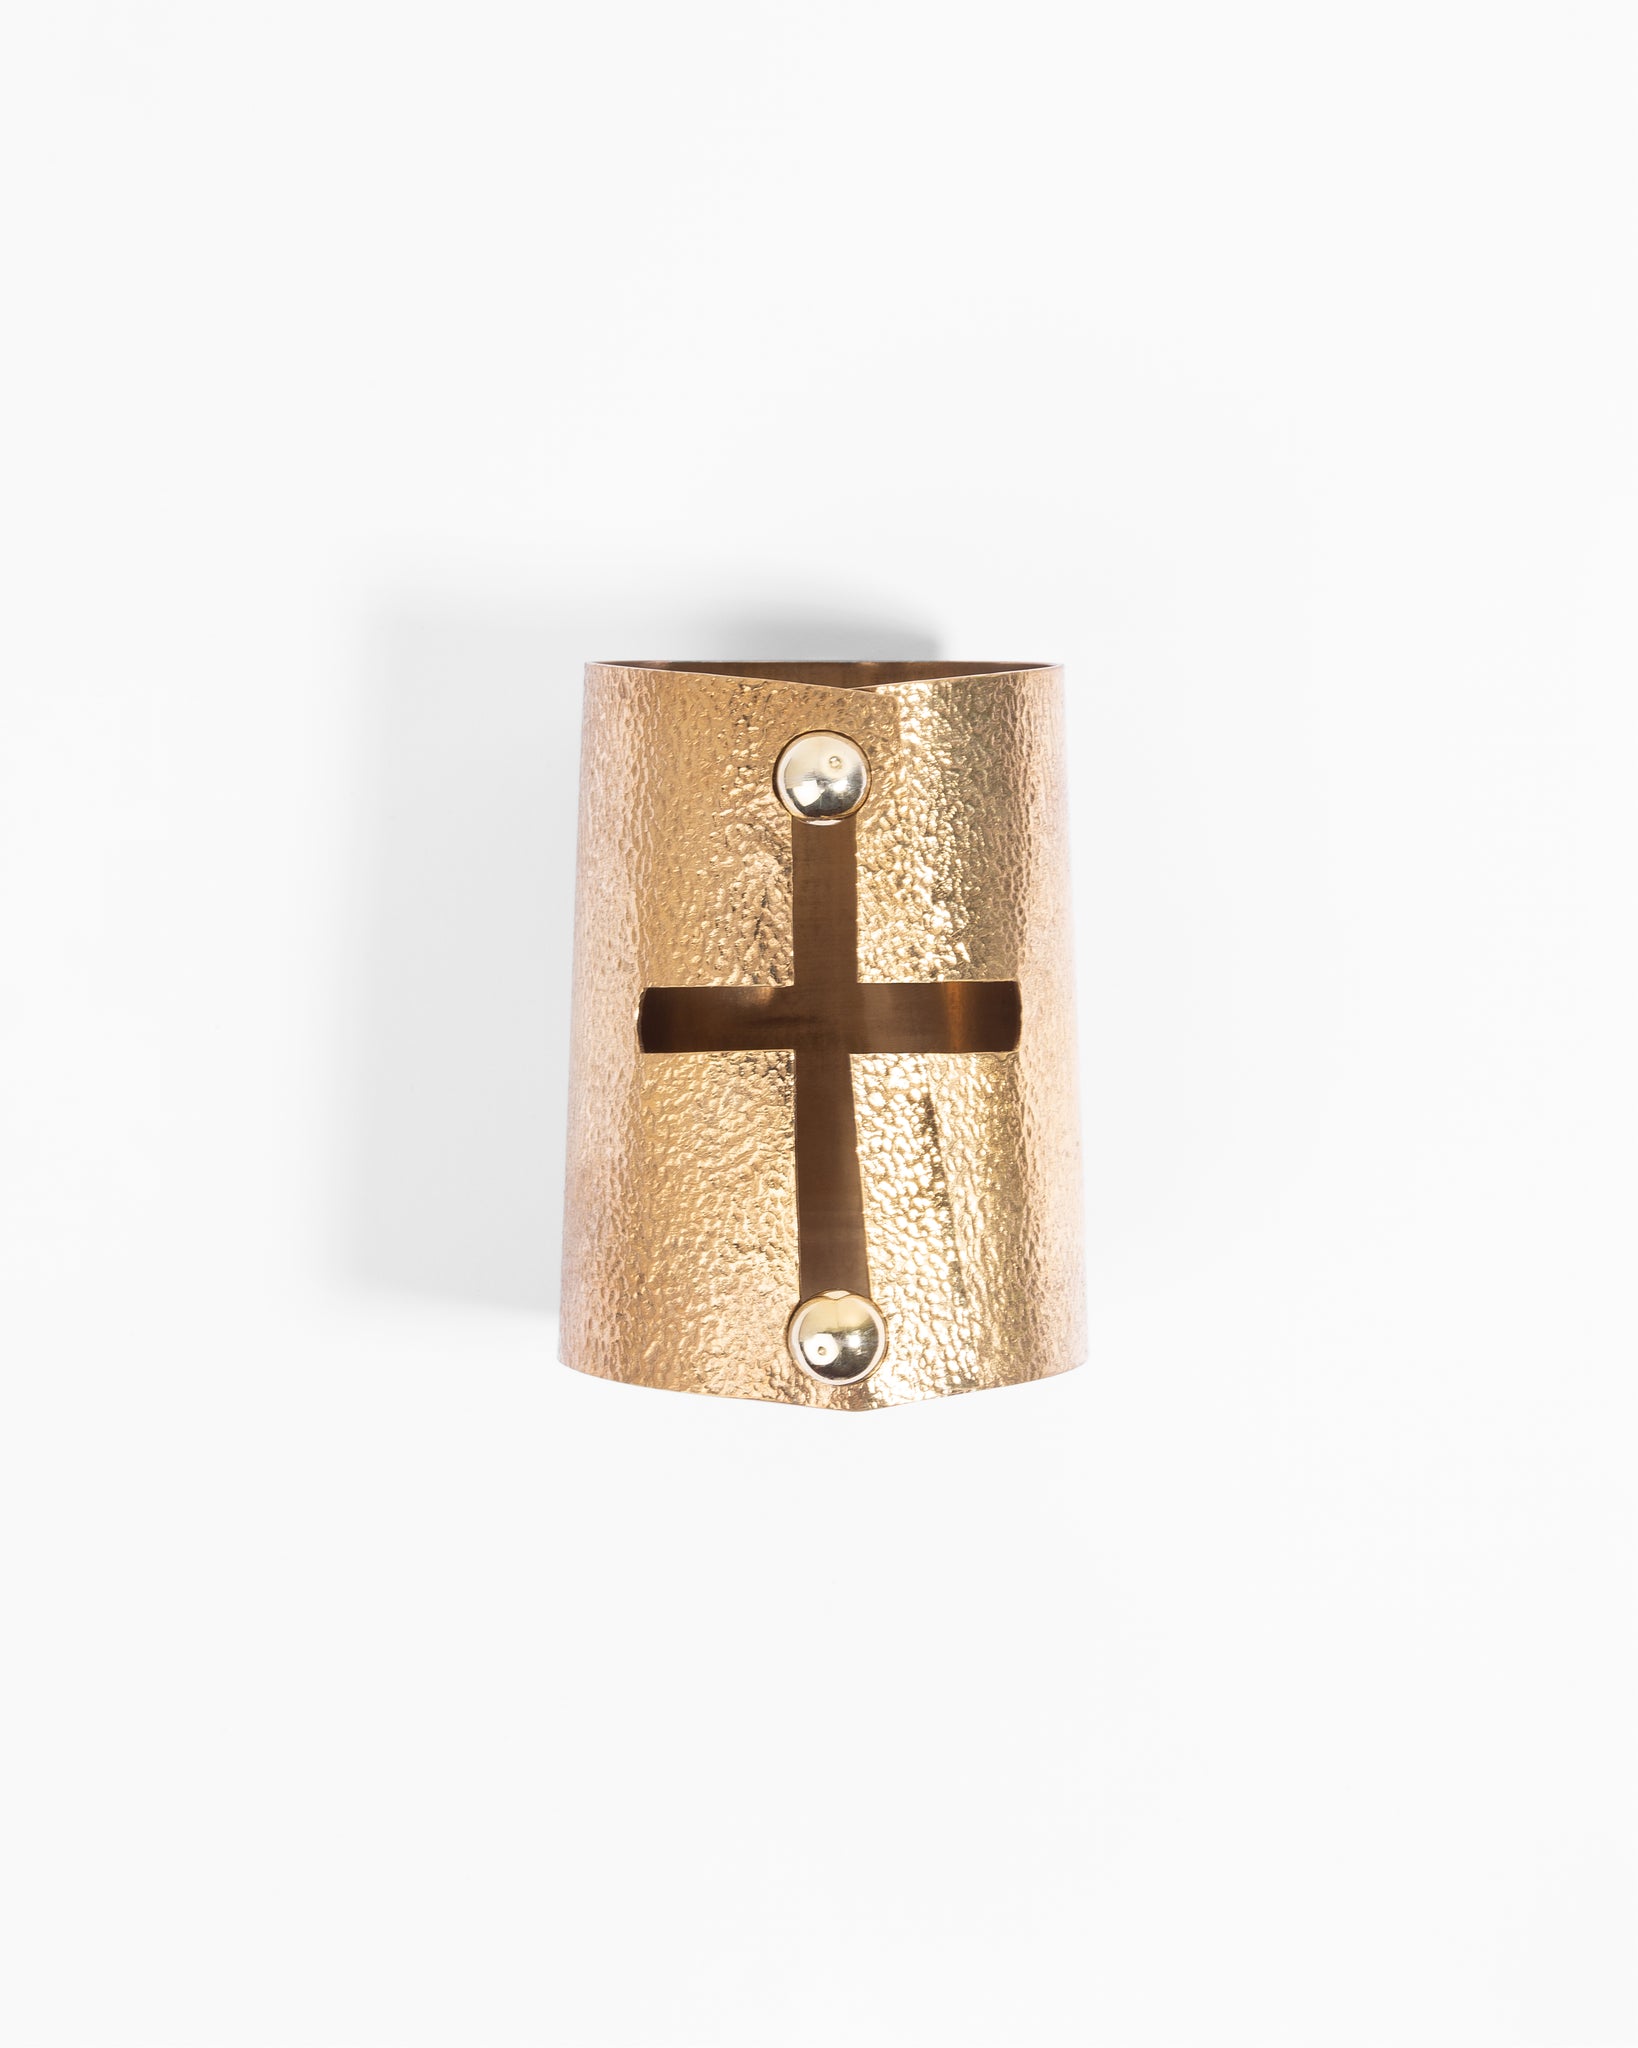 Handcrafted solid bronze bracelet depicting rounded cross with apple buttons